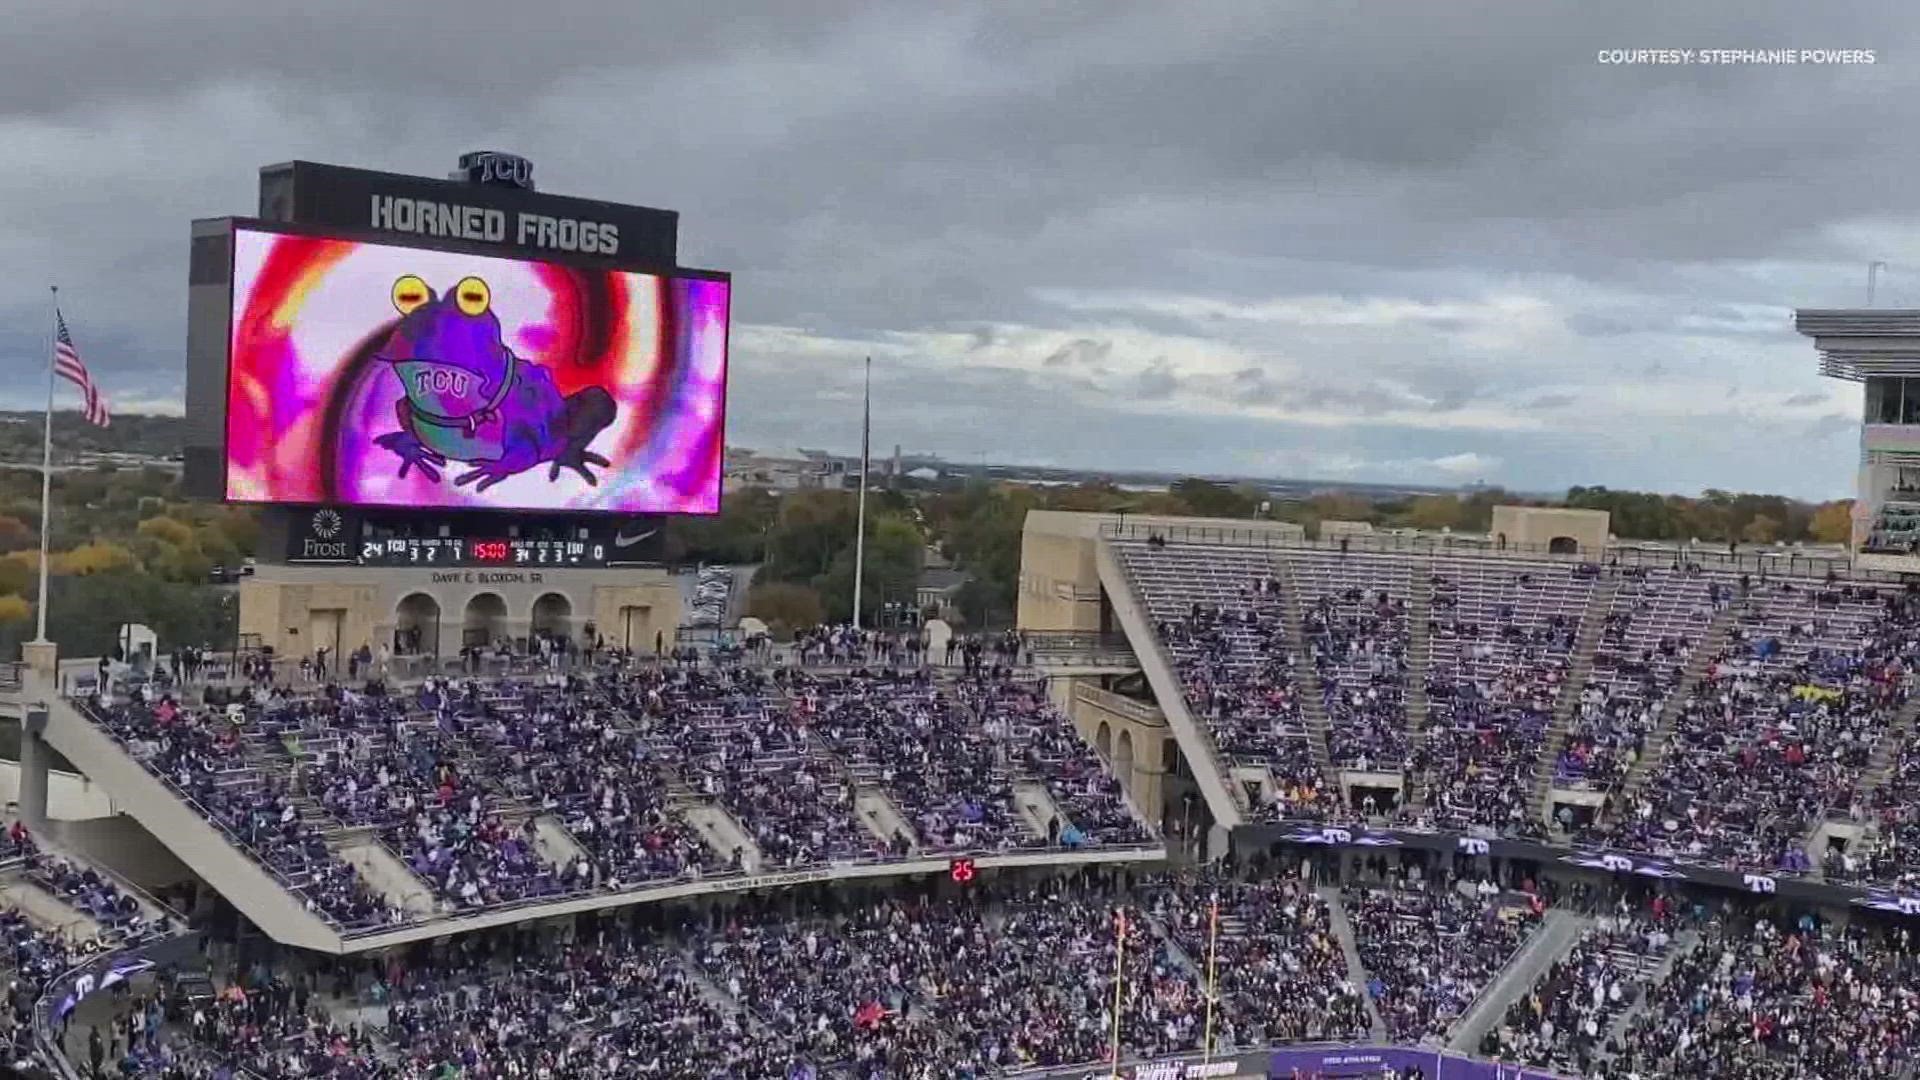 The unofficial mascot of TCU's football team has blown up.